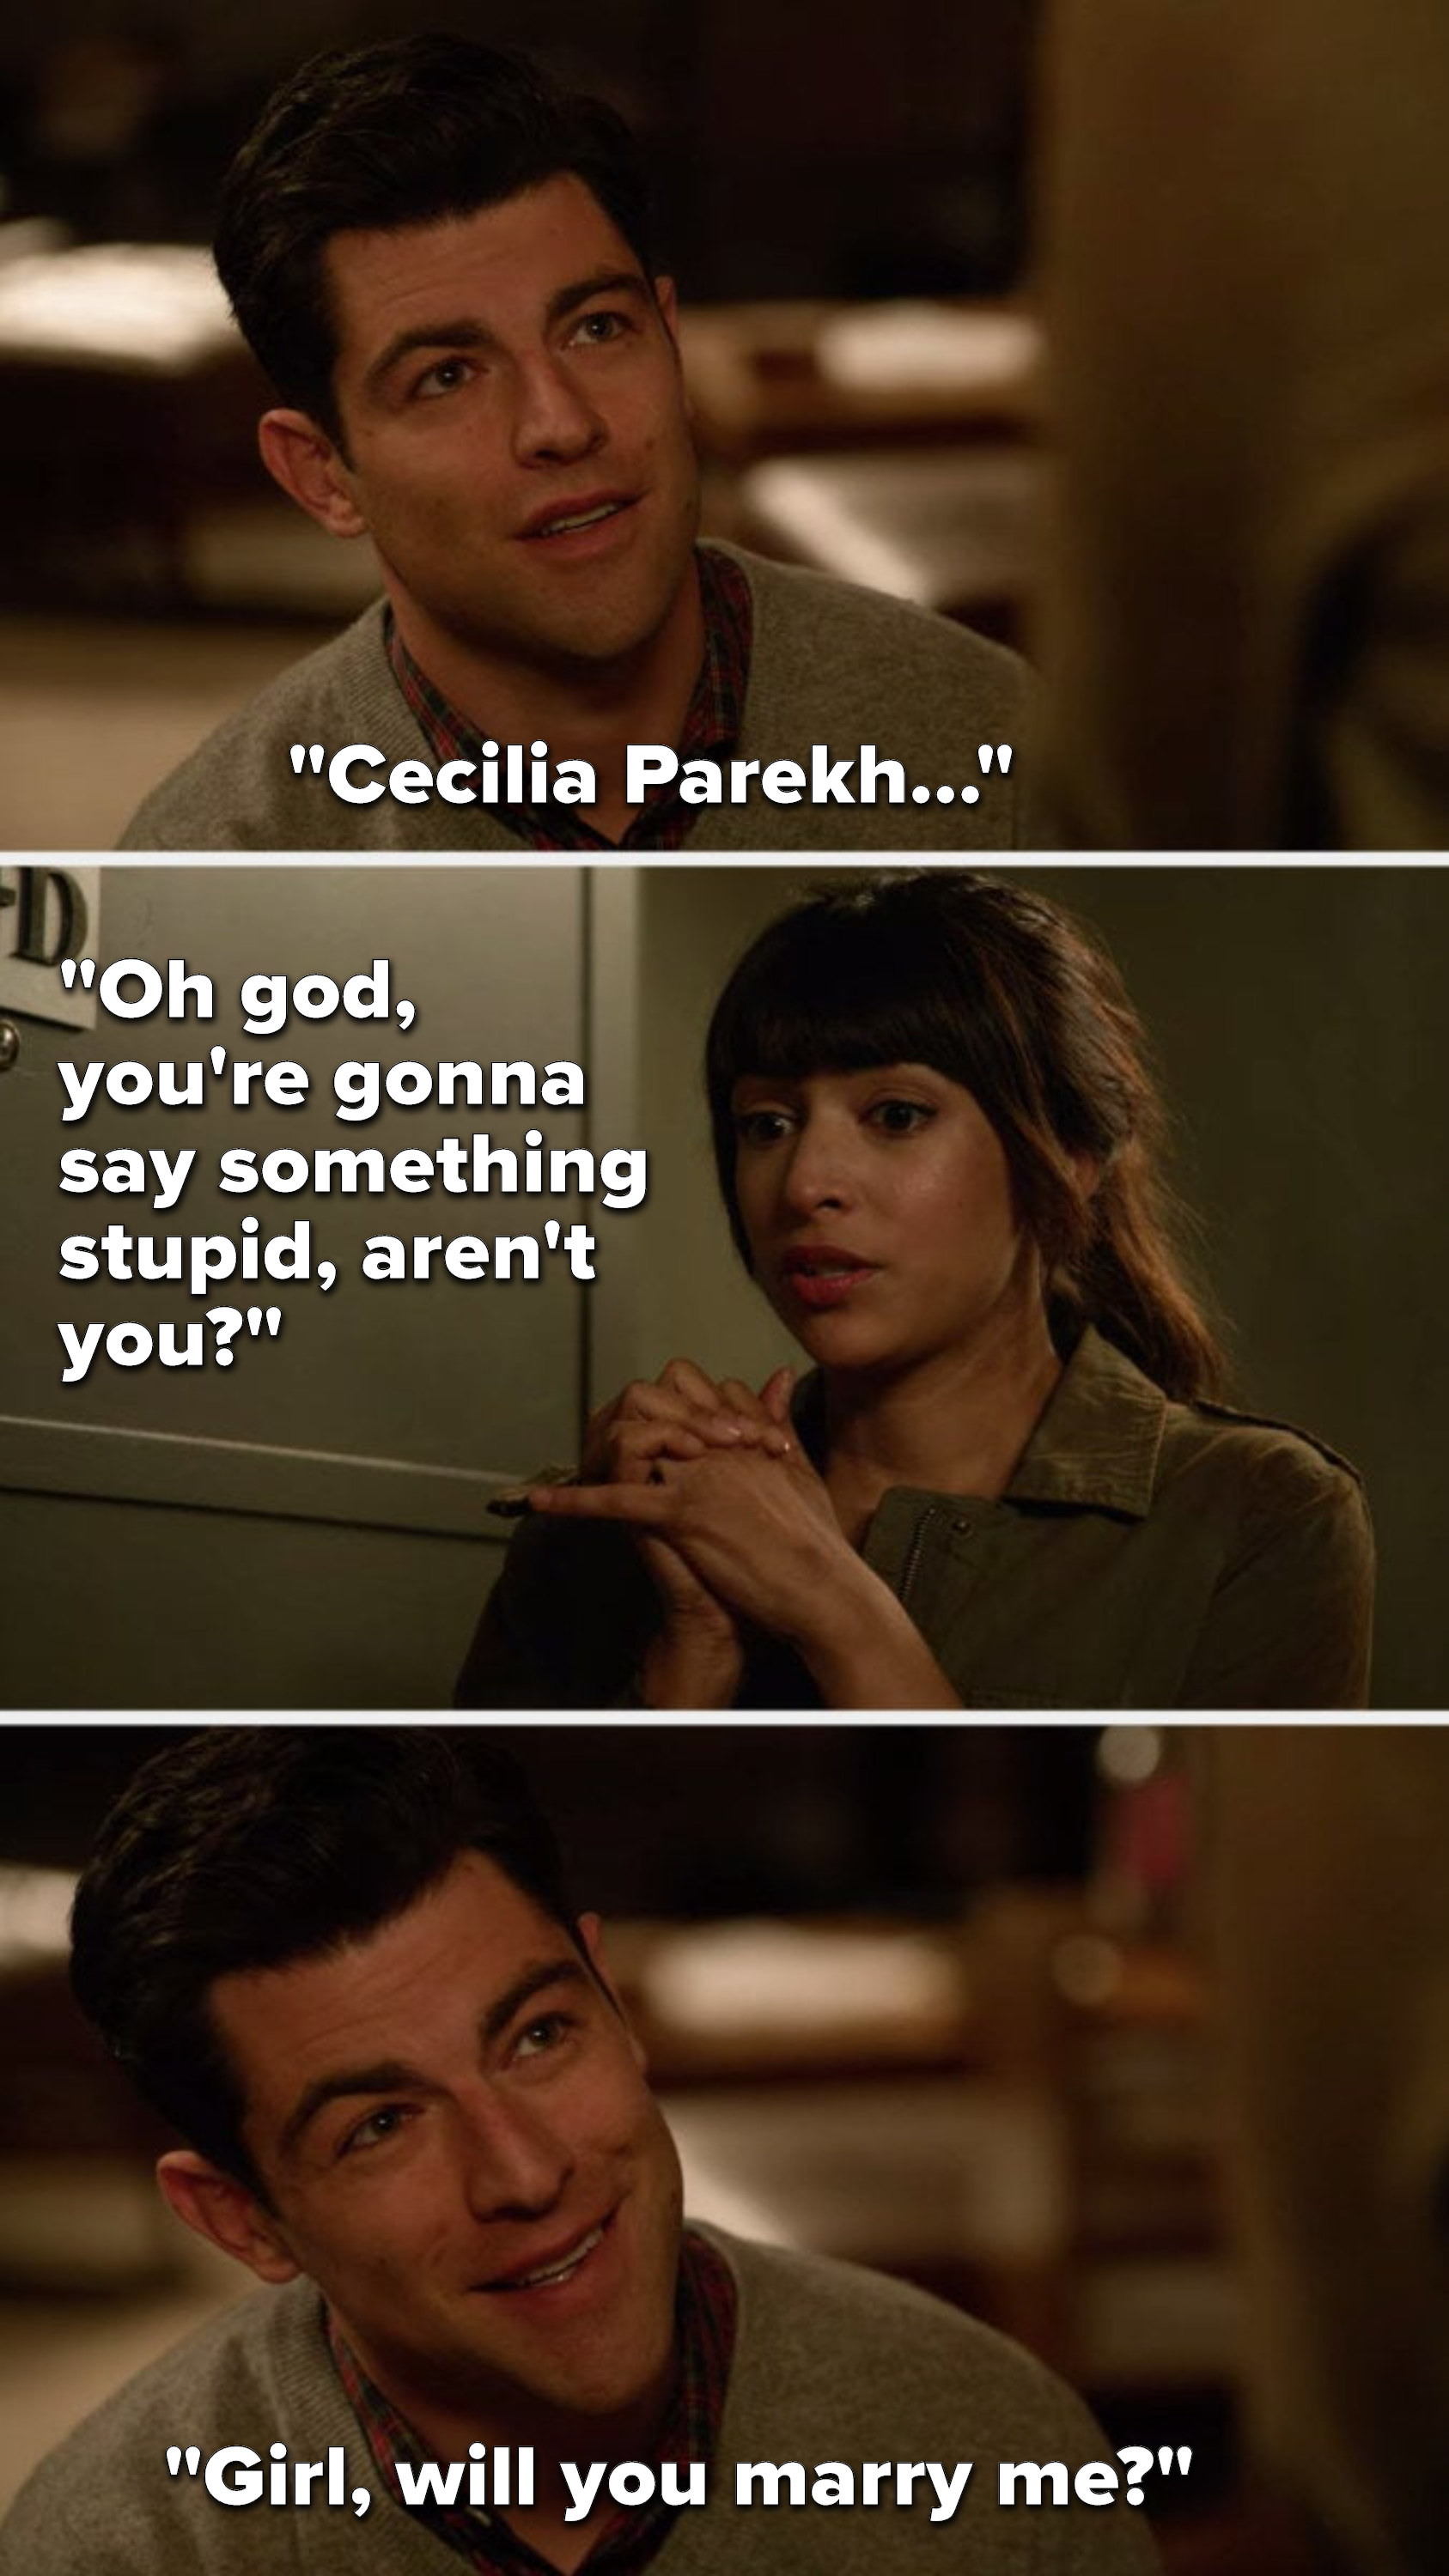 Schmidt says, &quot;Cecilia Parekh...&quot; Cece says, &quot;Oh god, you&#x27;re gonna say something stupid, aren&#x27;t you,&quot; and Schmidt says, &quot;Girl, will you marry me&quot;